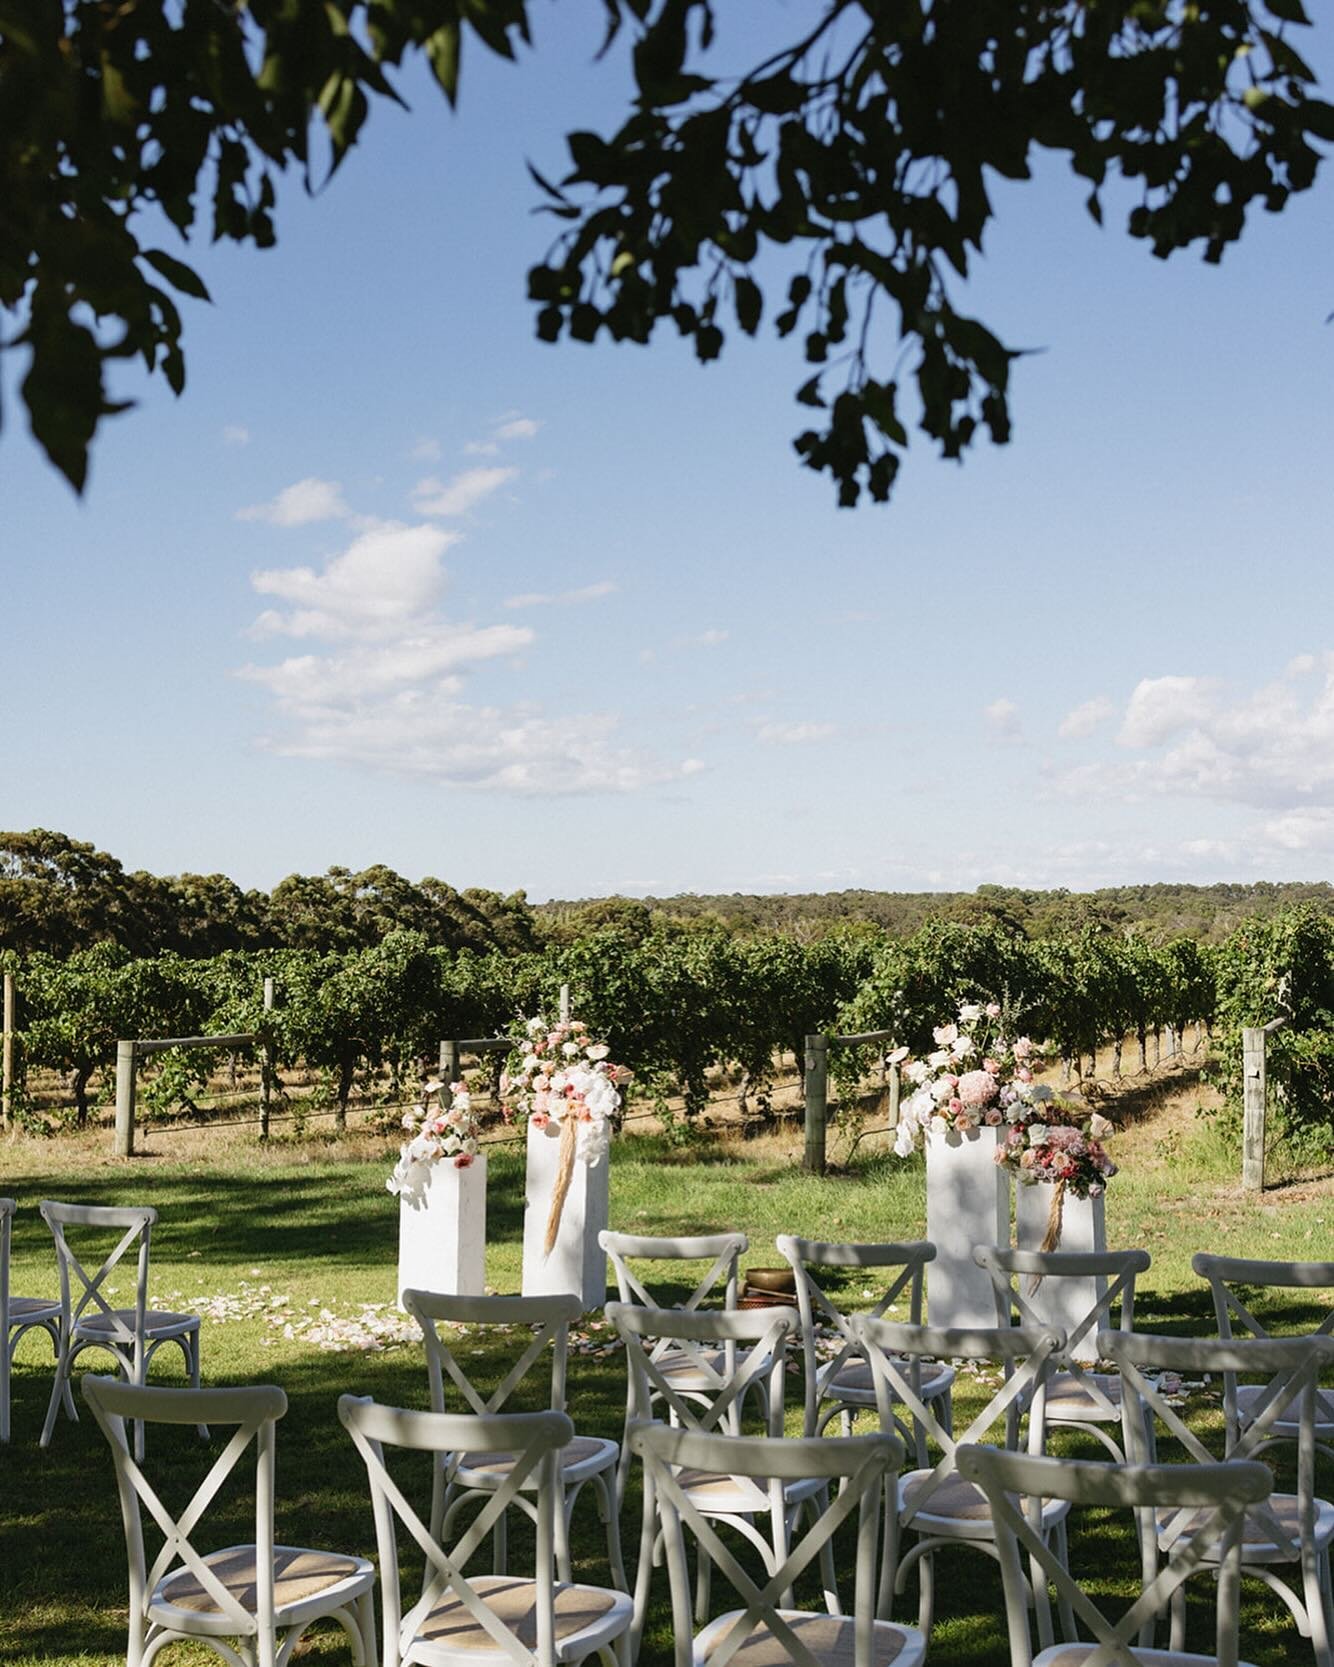 Weddings with vineyard vistas and clear blue skies - this is what&rsquo;s it&rsquo;s all about celebrating in the beautiful South West👌 LUCY + BEN chose white furnishings and textured plinths, bloomed to perfection @scentiment_flowers 💐 
📷 @mitcha